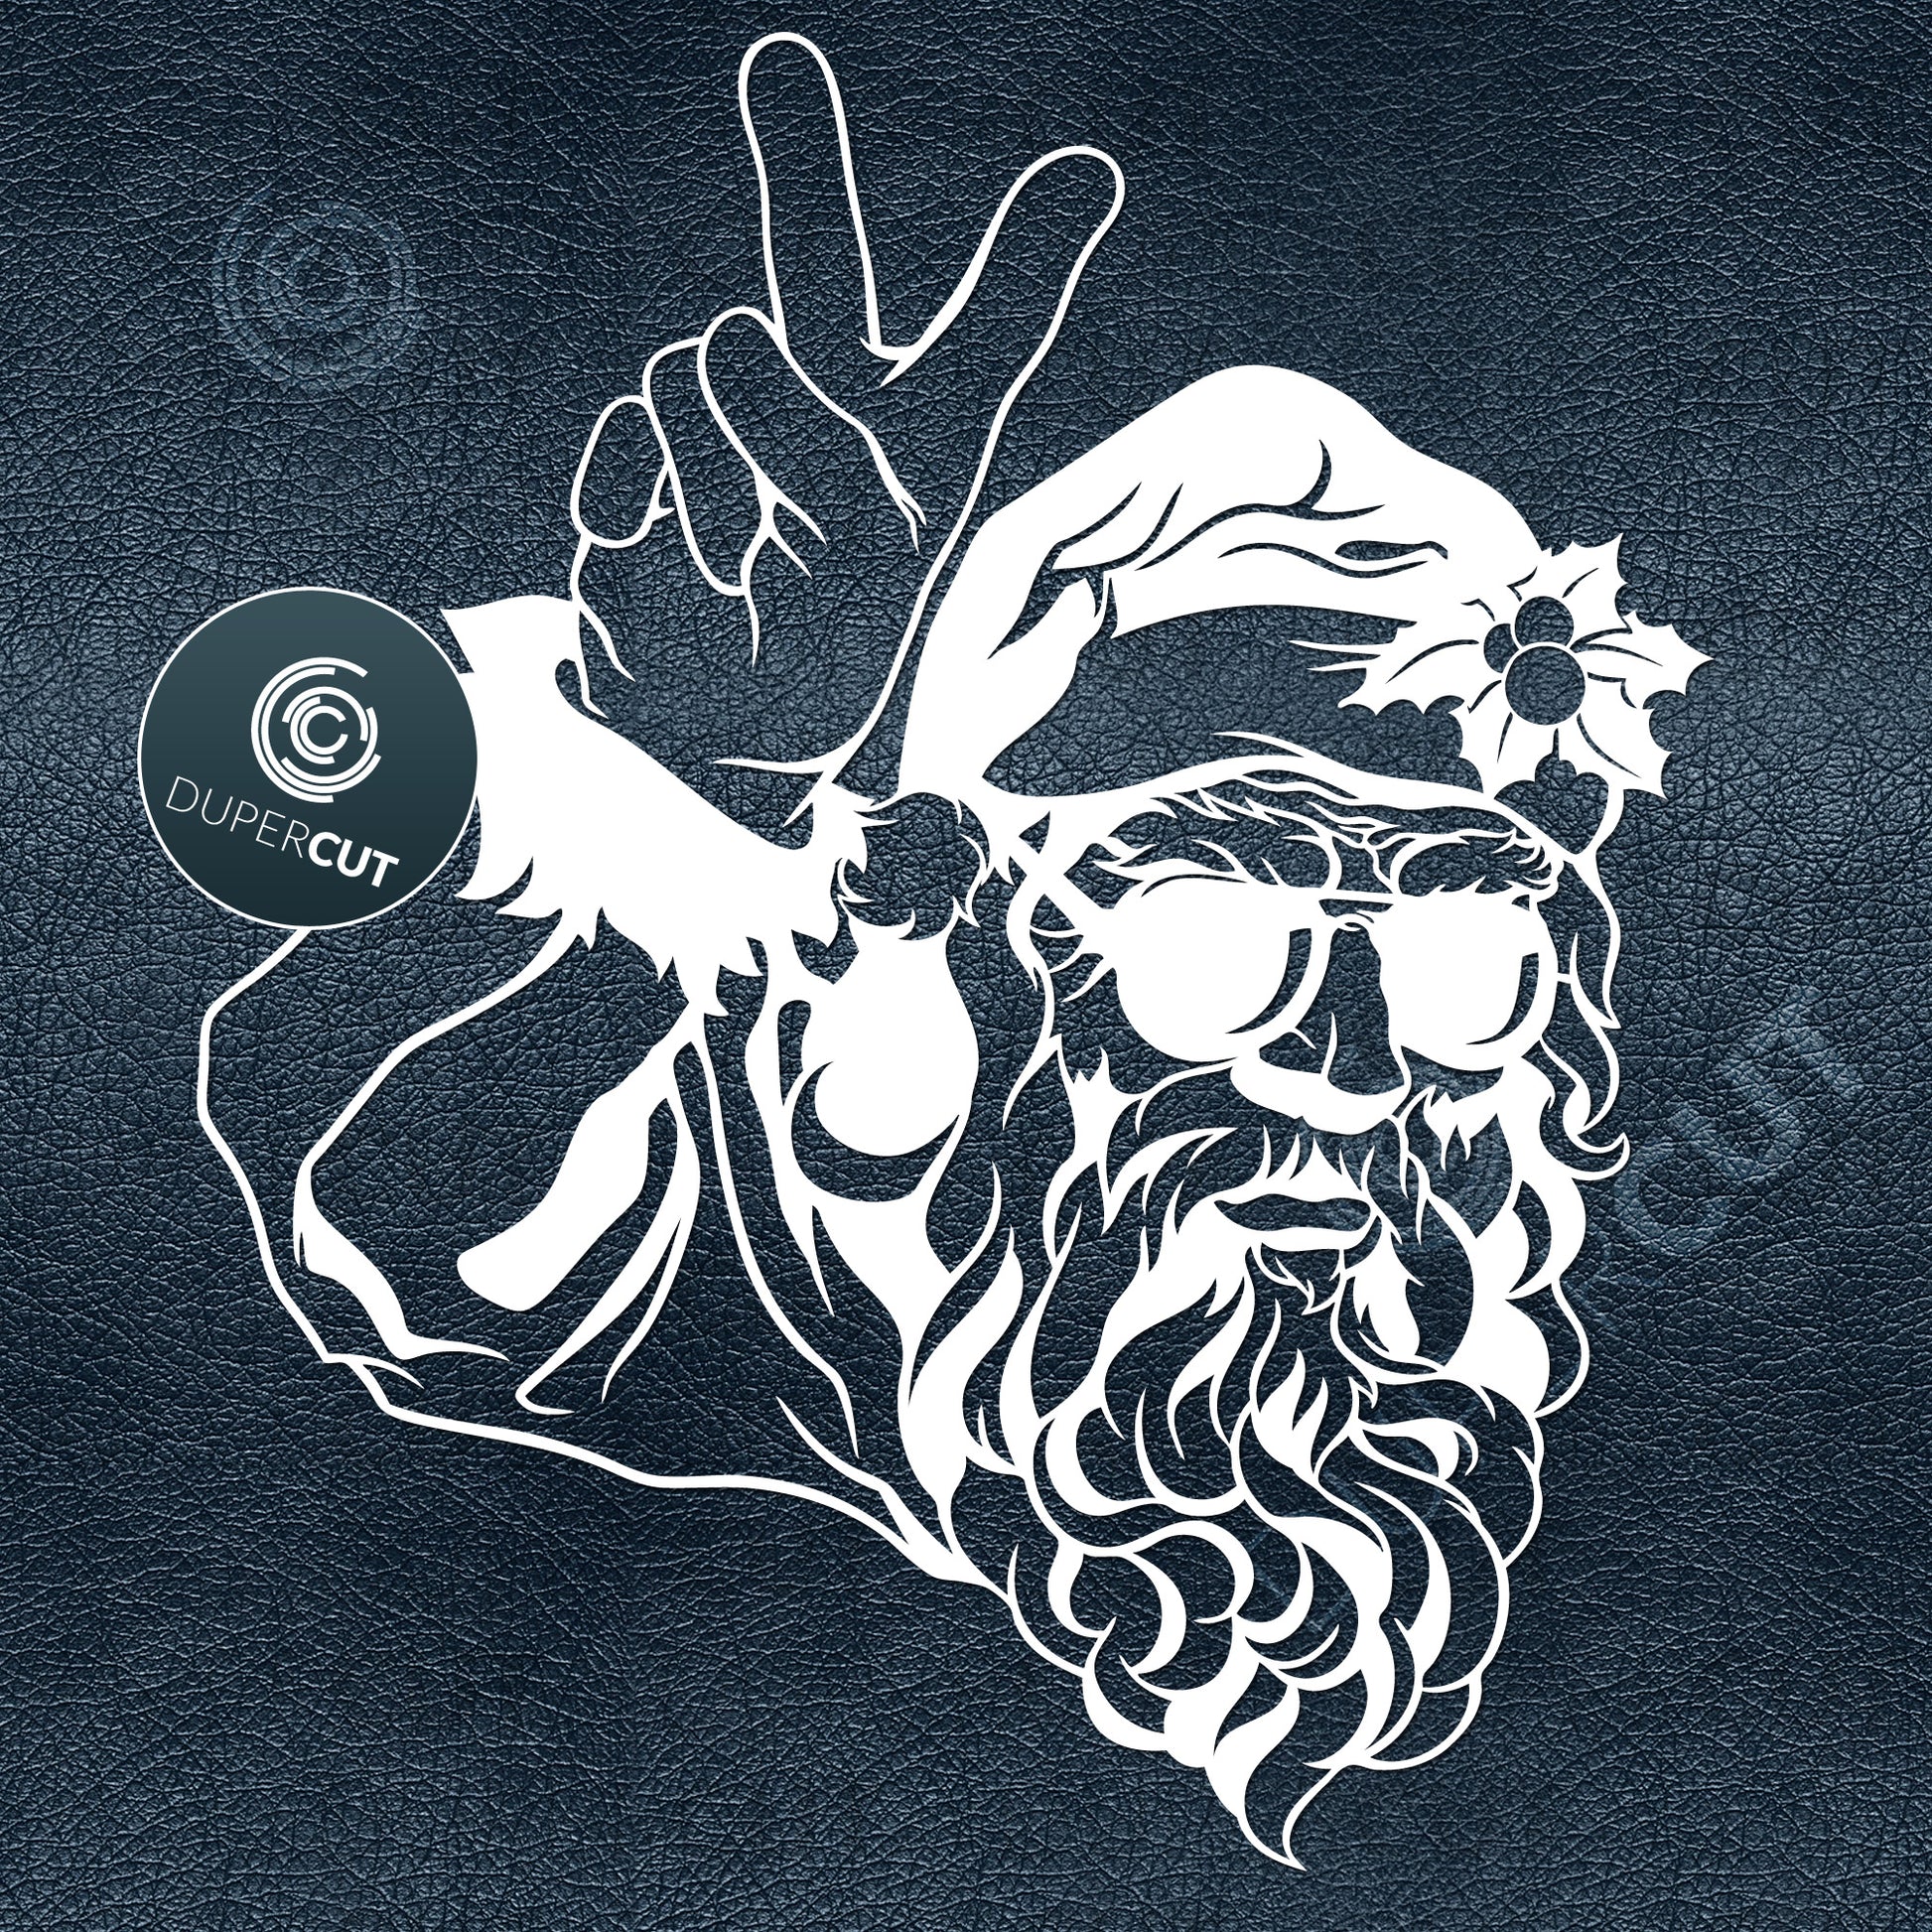 Santa with peace sign, line art illustration. SVG PNG DXF cutting files for Cricut, Silhouette, Glowforge, print on demand, sublimation templates